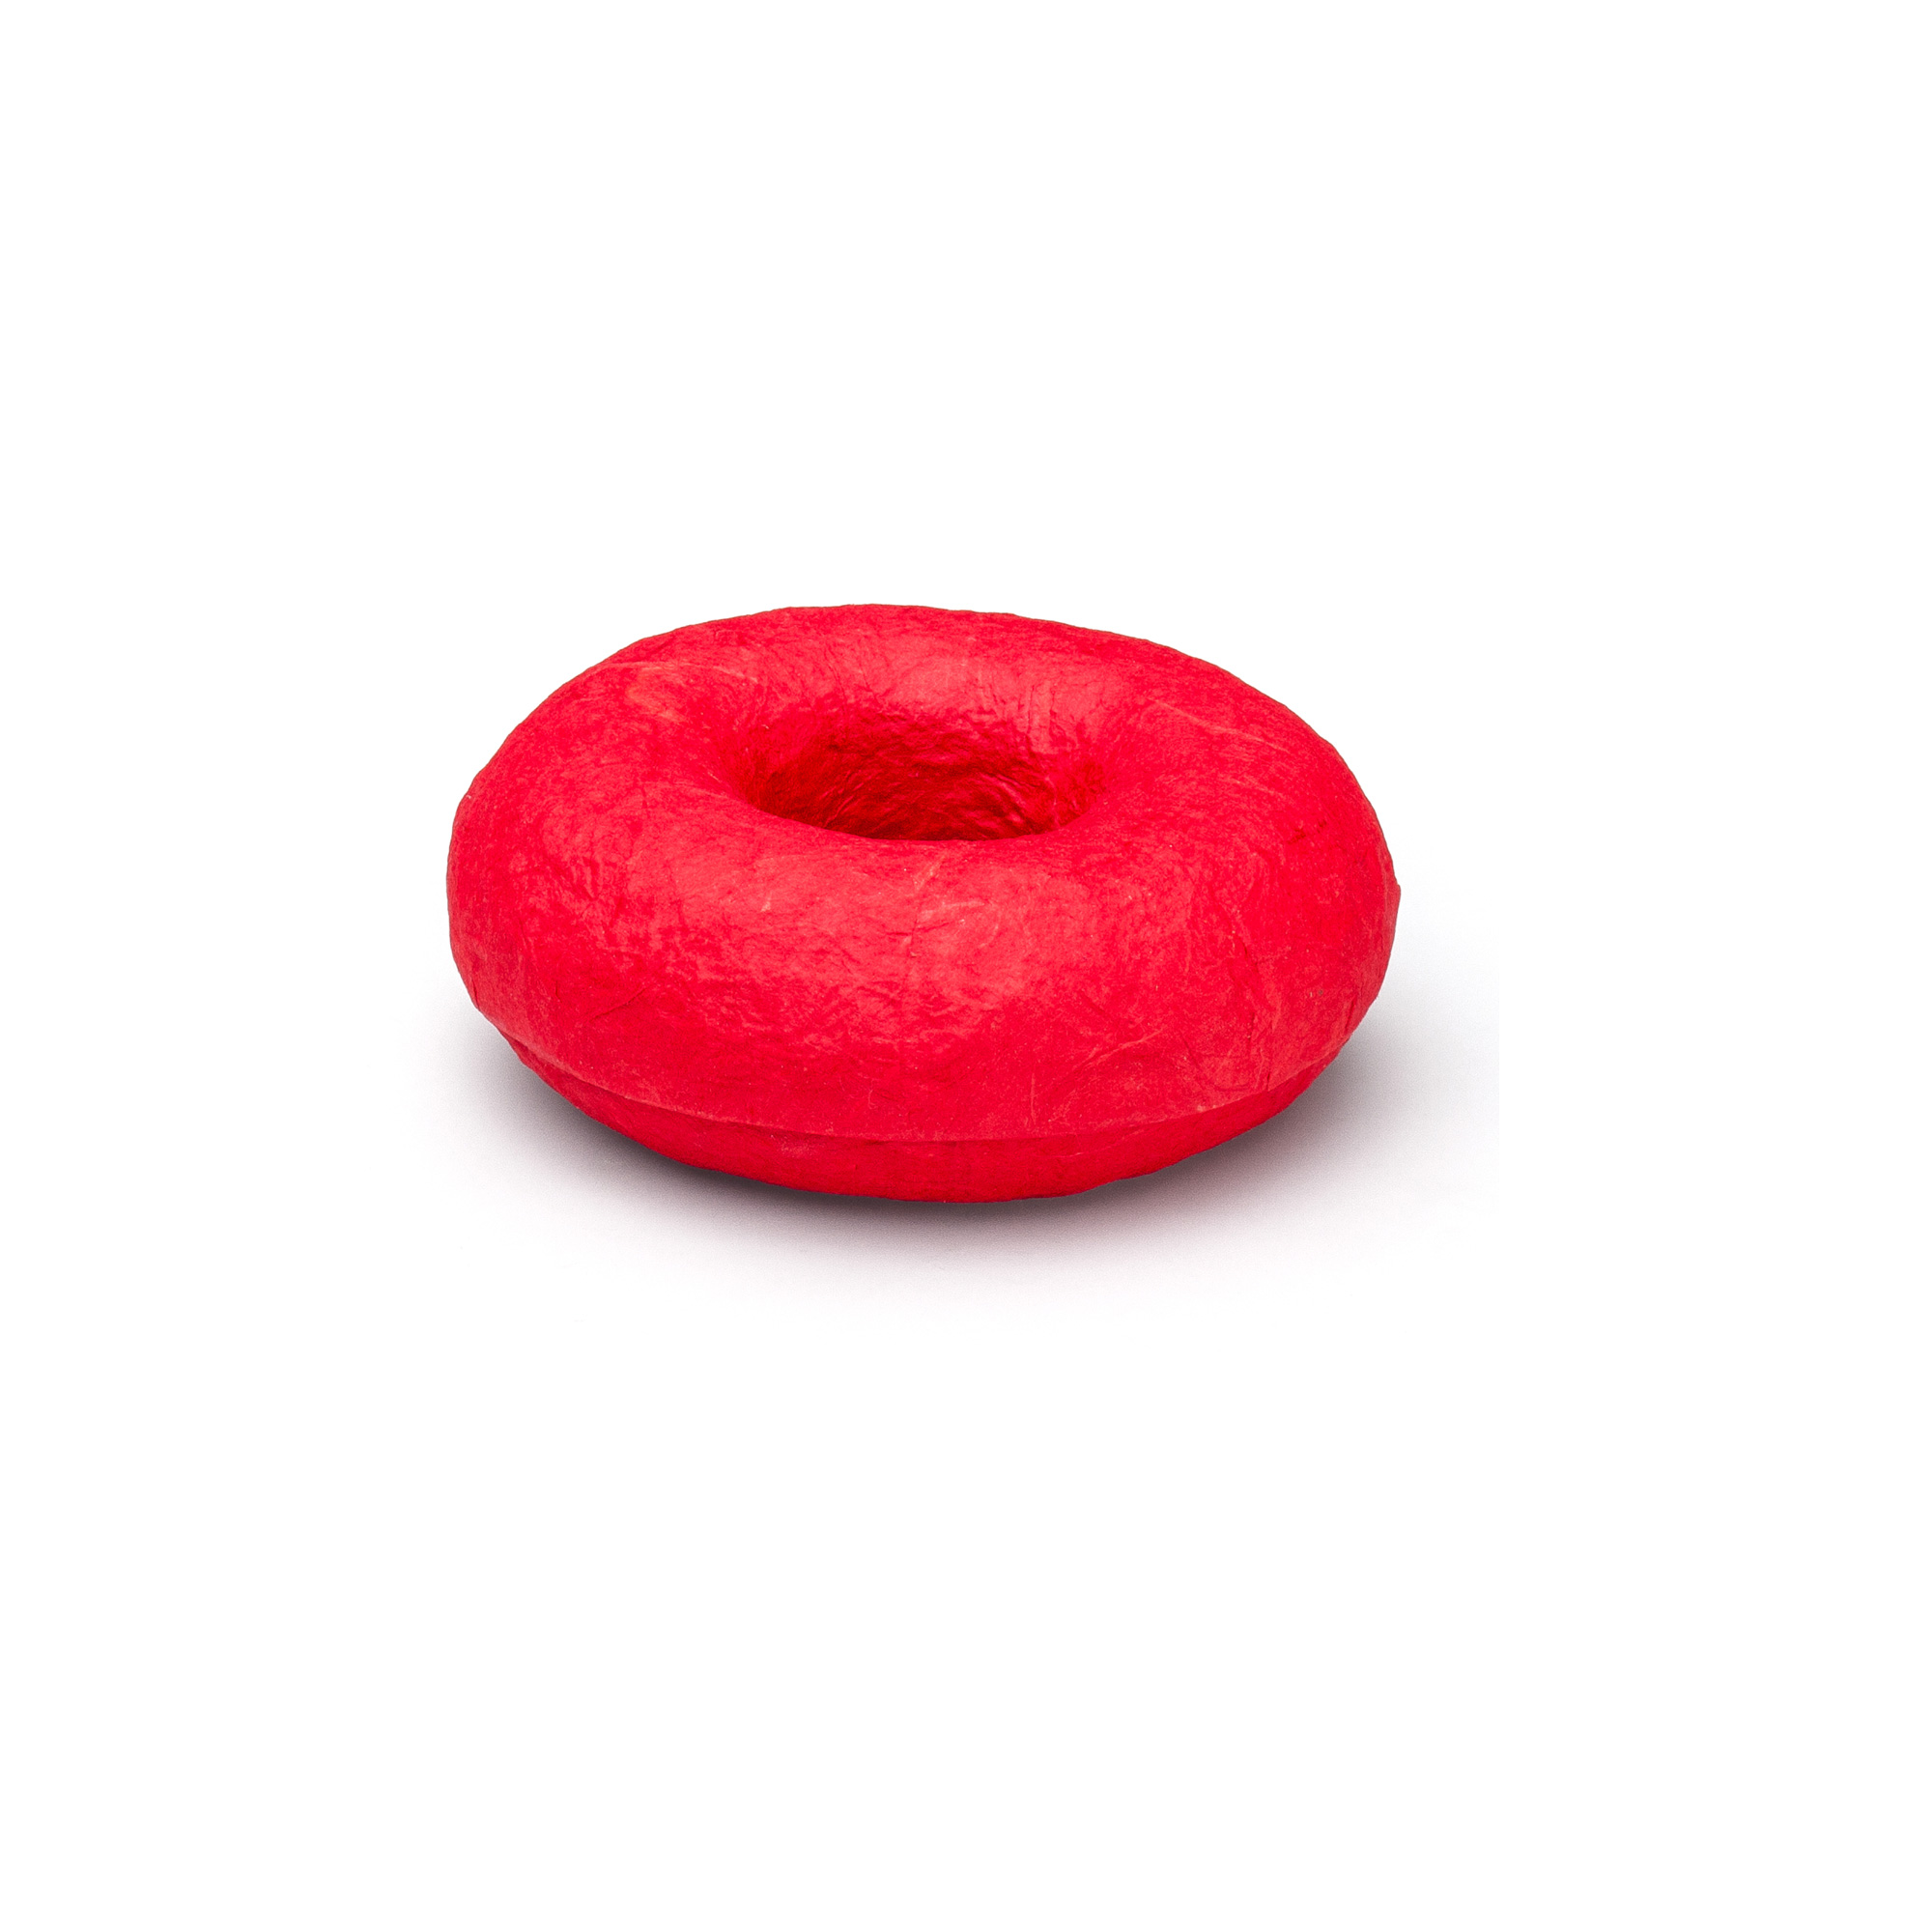 DONUT small red